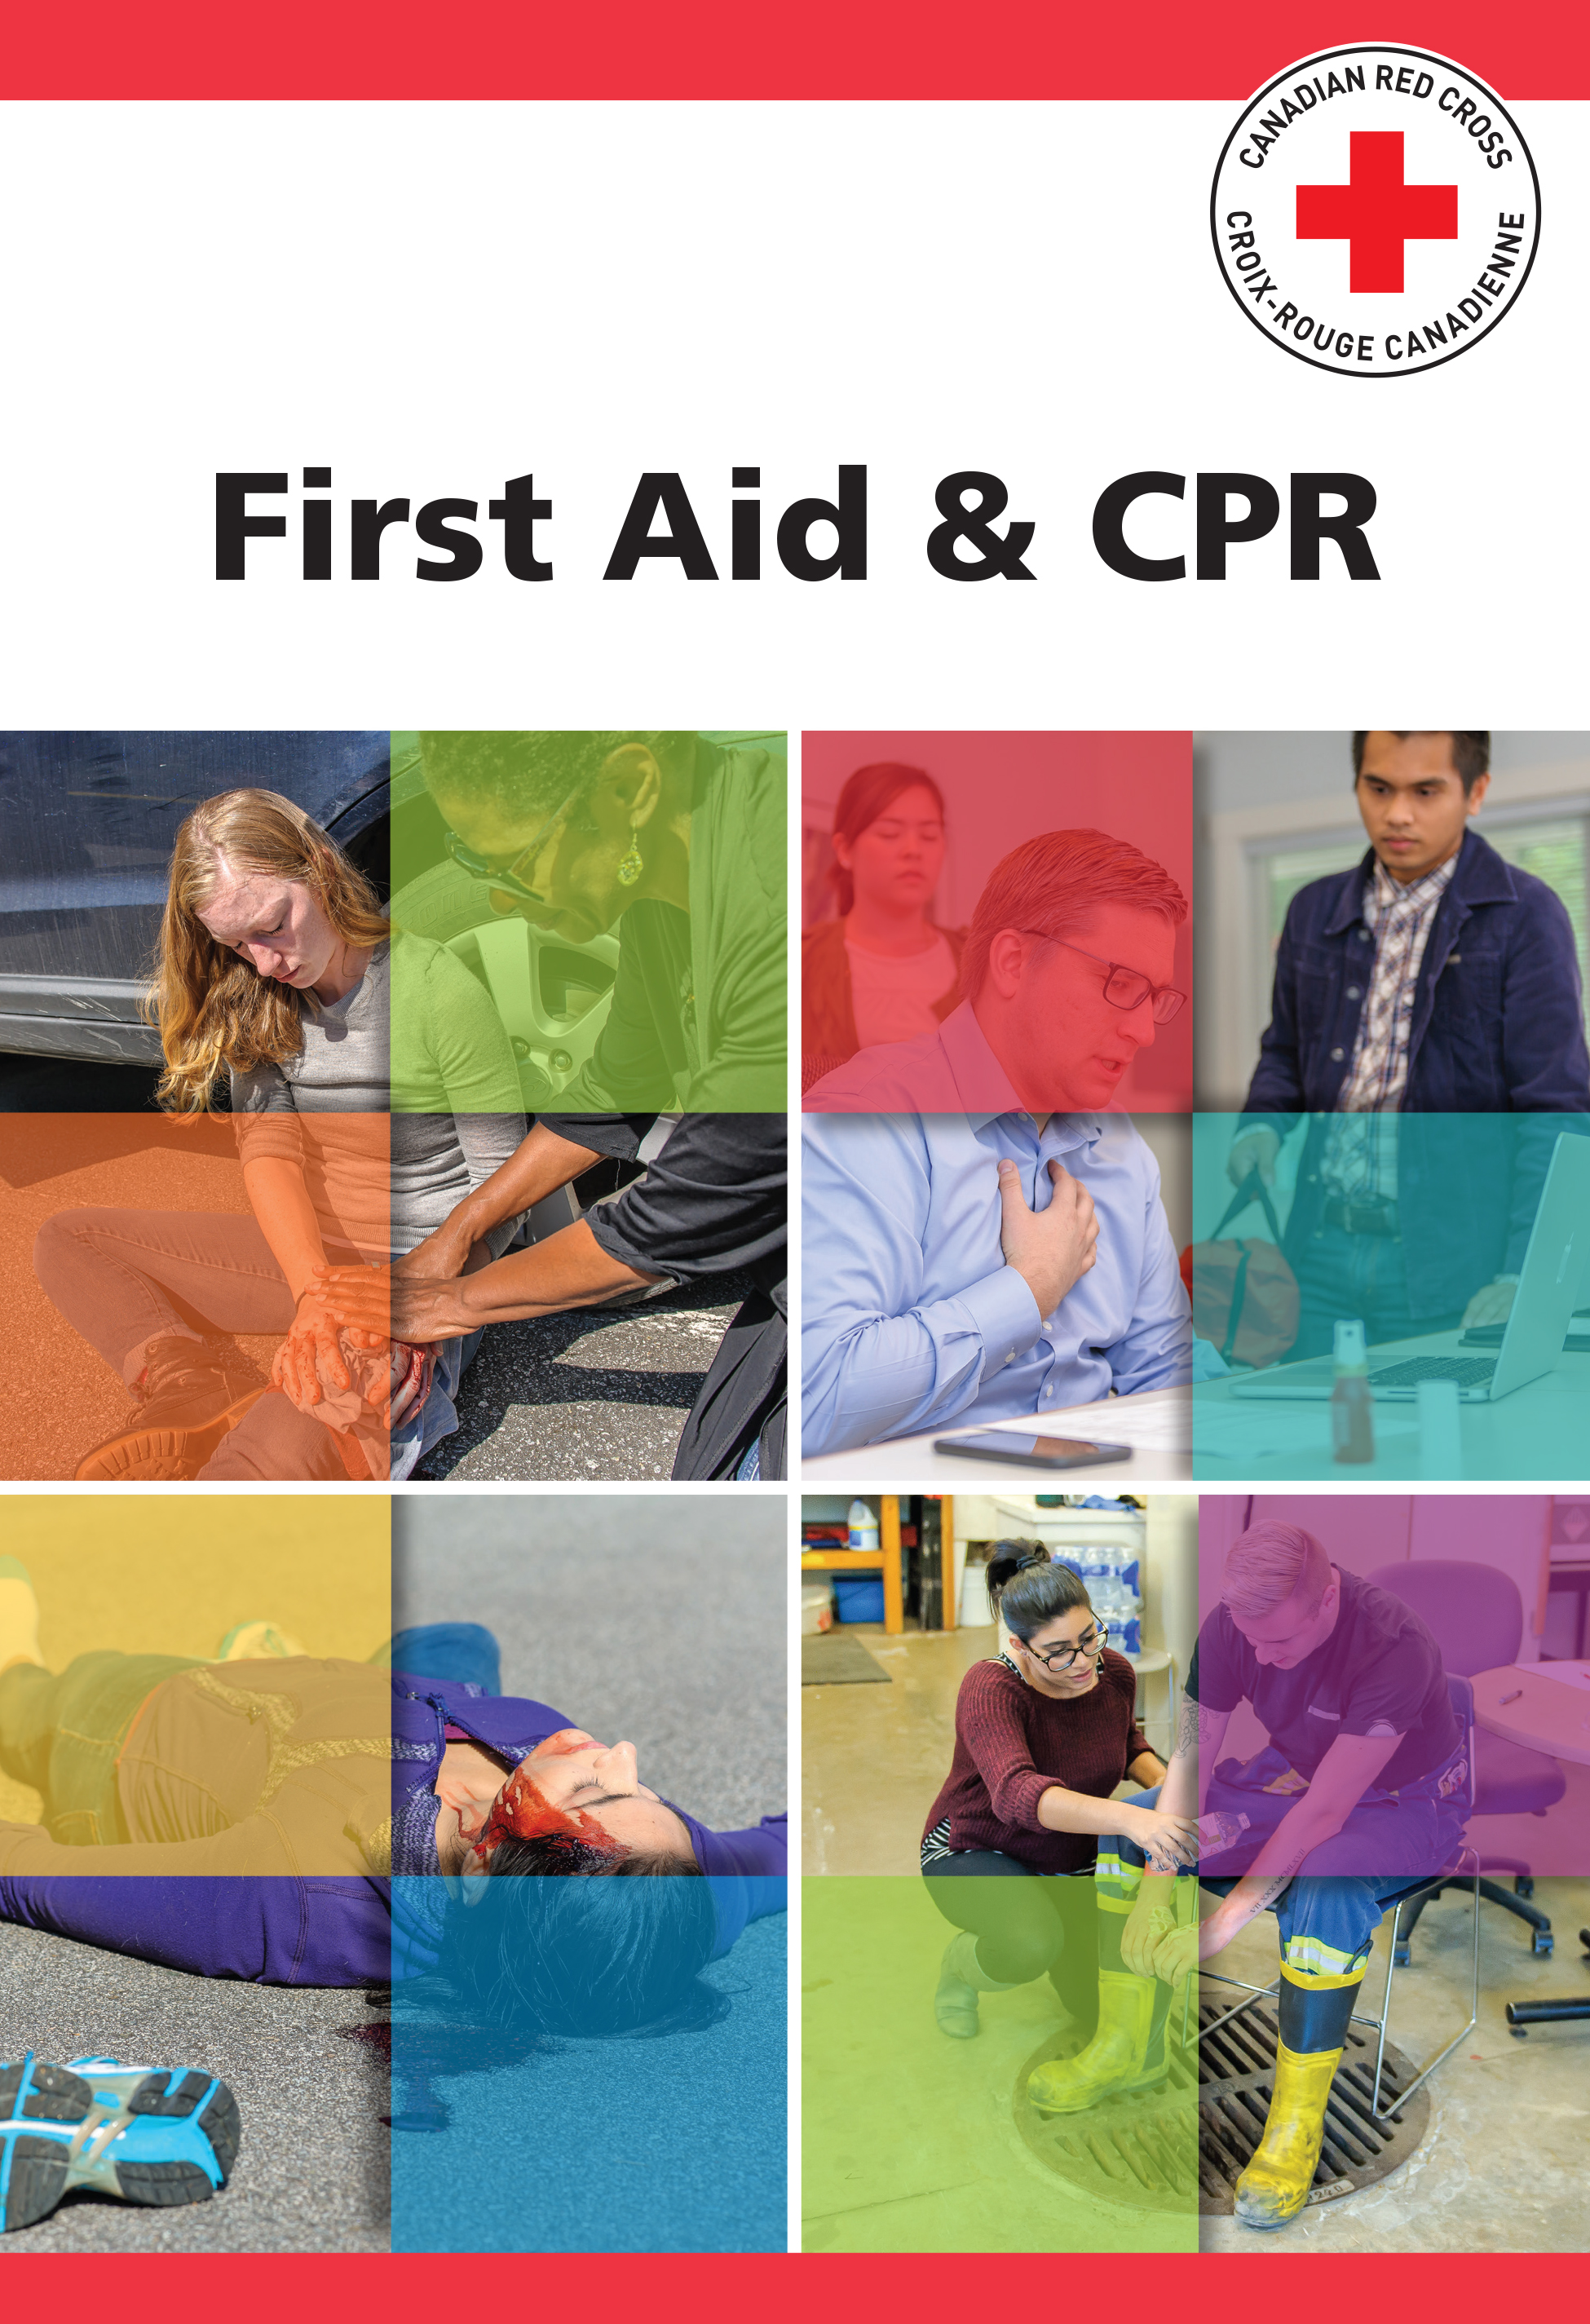 Emergency First Aid & CPR Manual Victoria-TILLICUM